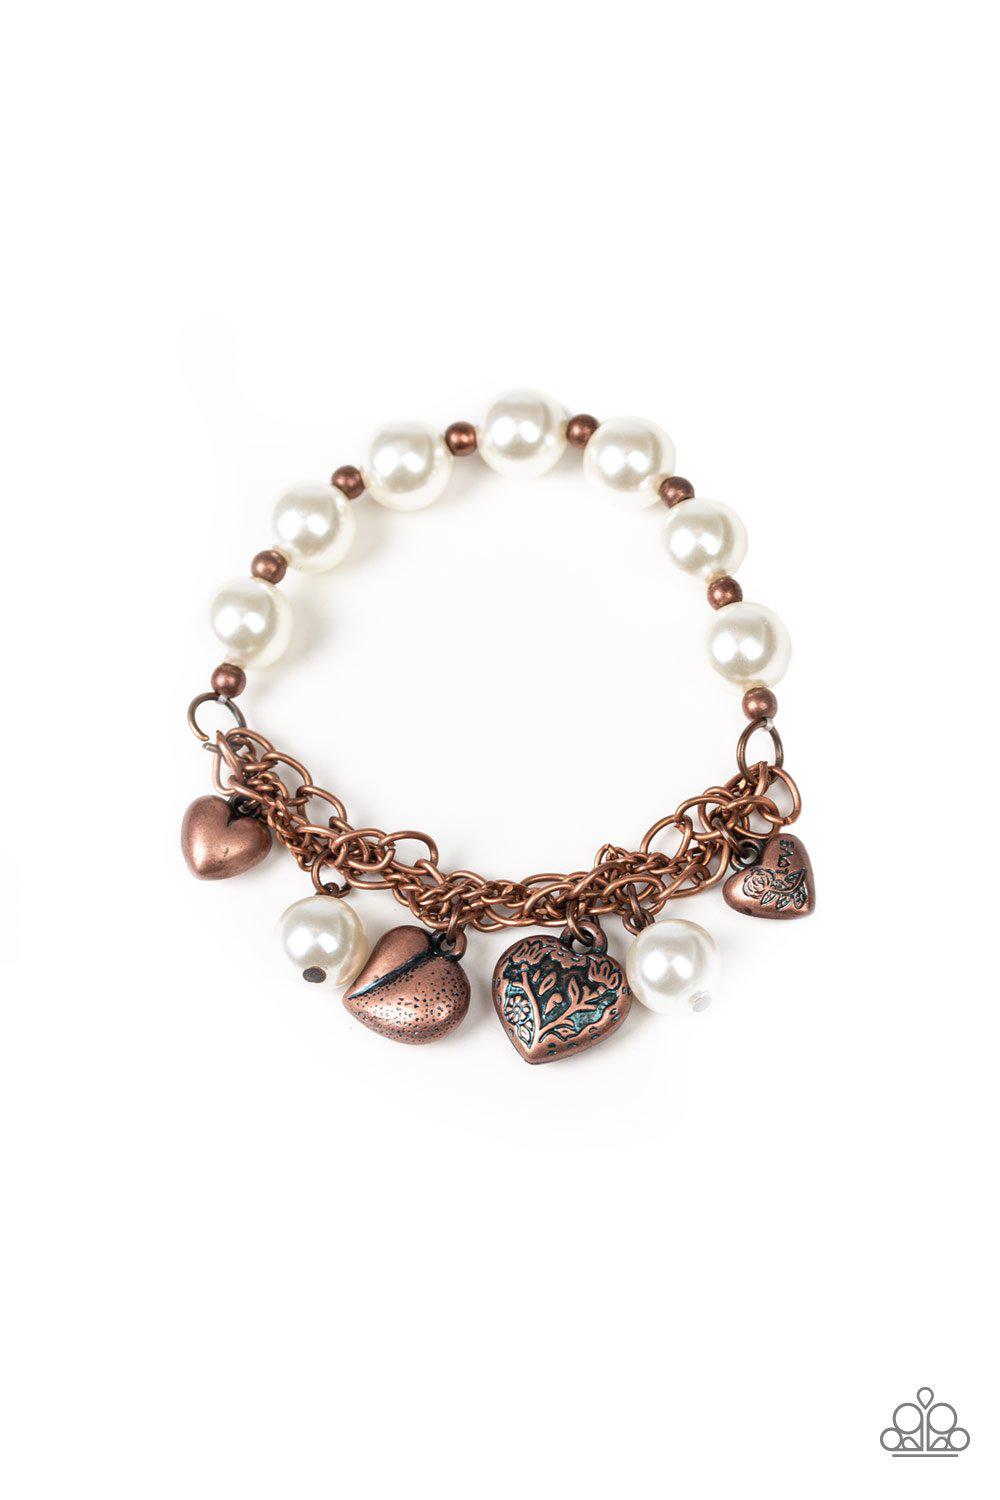 More Amour Copper and Pearl Heart Bracelet - Paparazzi Accessories-CarasShop.com - $5 Jewelry by Cara Jewels